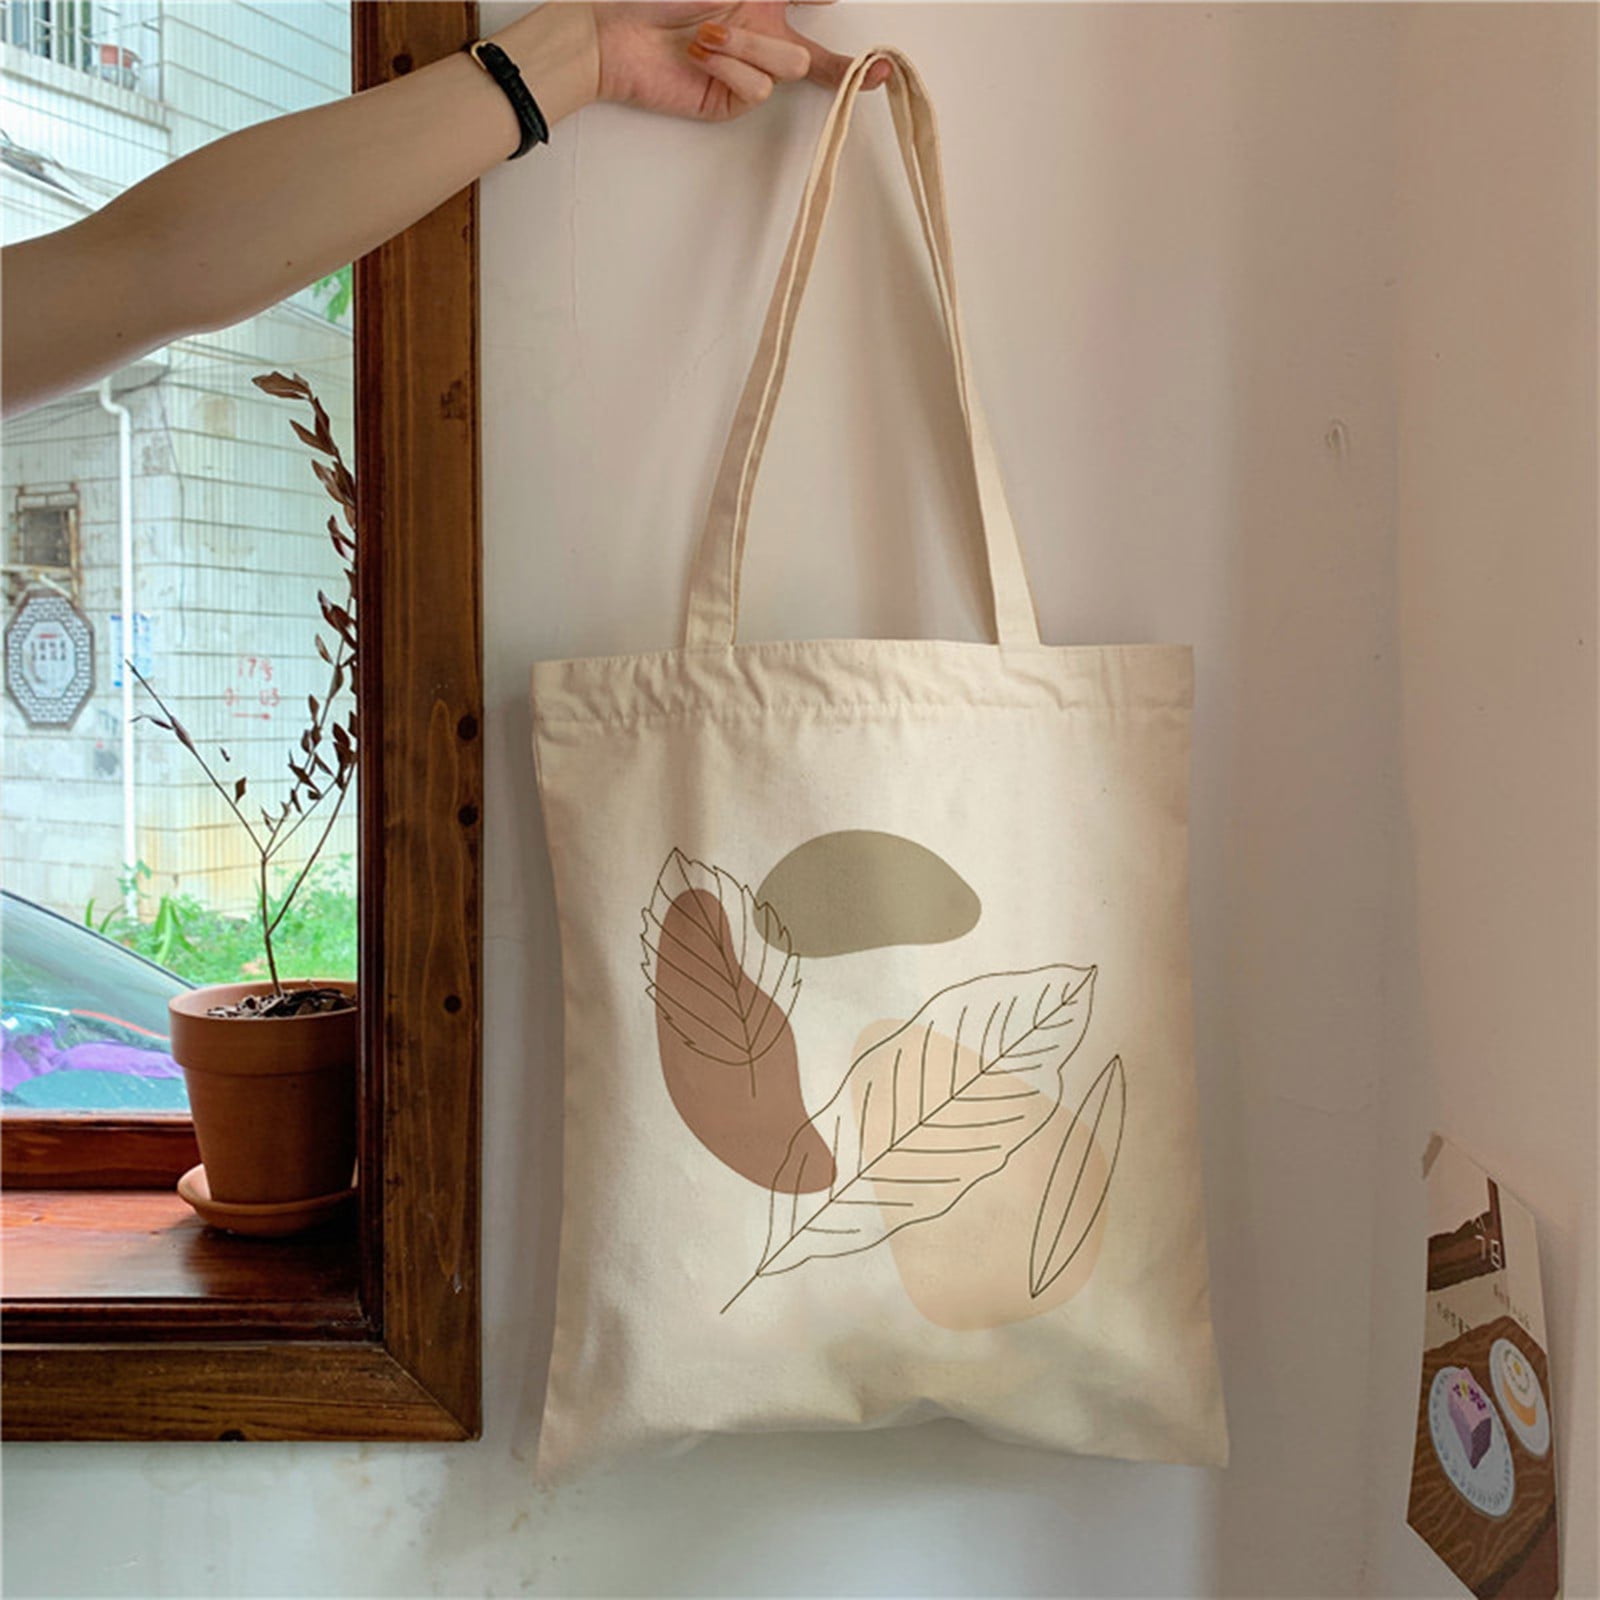 ZHIHUITL Cotton Canvas Tote,Hand Tote Shopping Bags, Eco Friendly  Shoppers,A pack of 3 natural cotton shopping tote bags of different  sizes,Natural